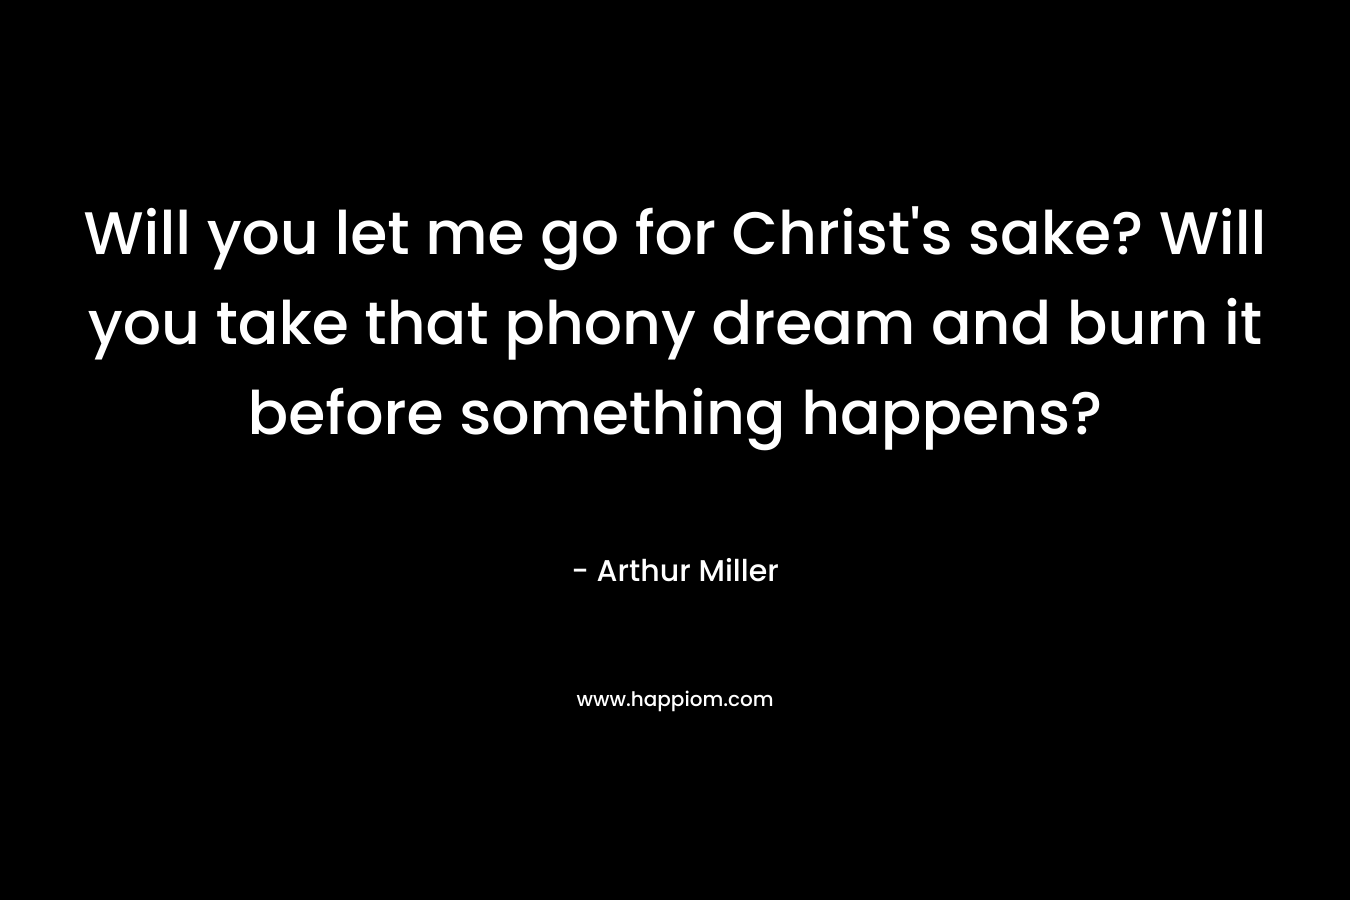 Will you let me go for Christ’s sake? Will you take that phony dream and burn it before something happens? – Arthur Miller